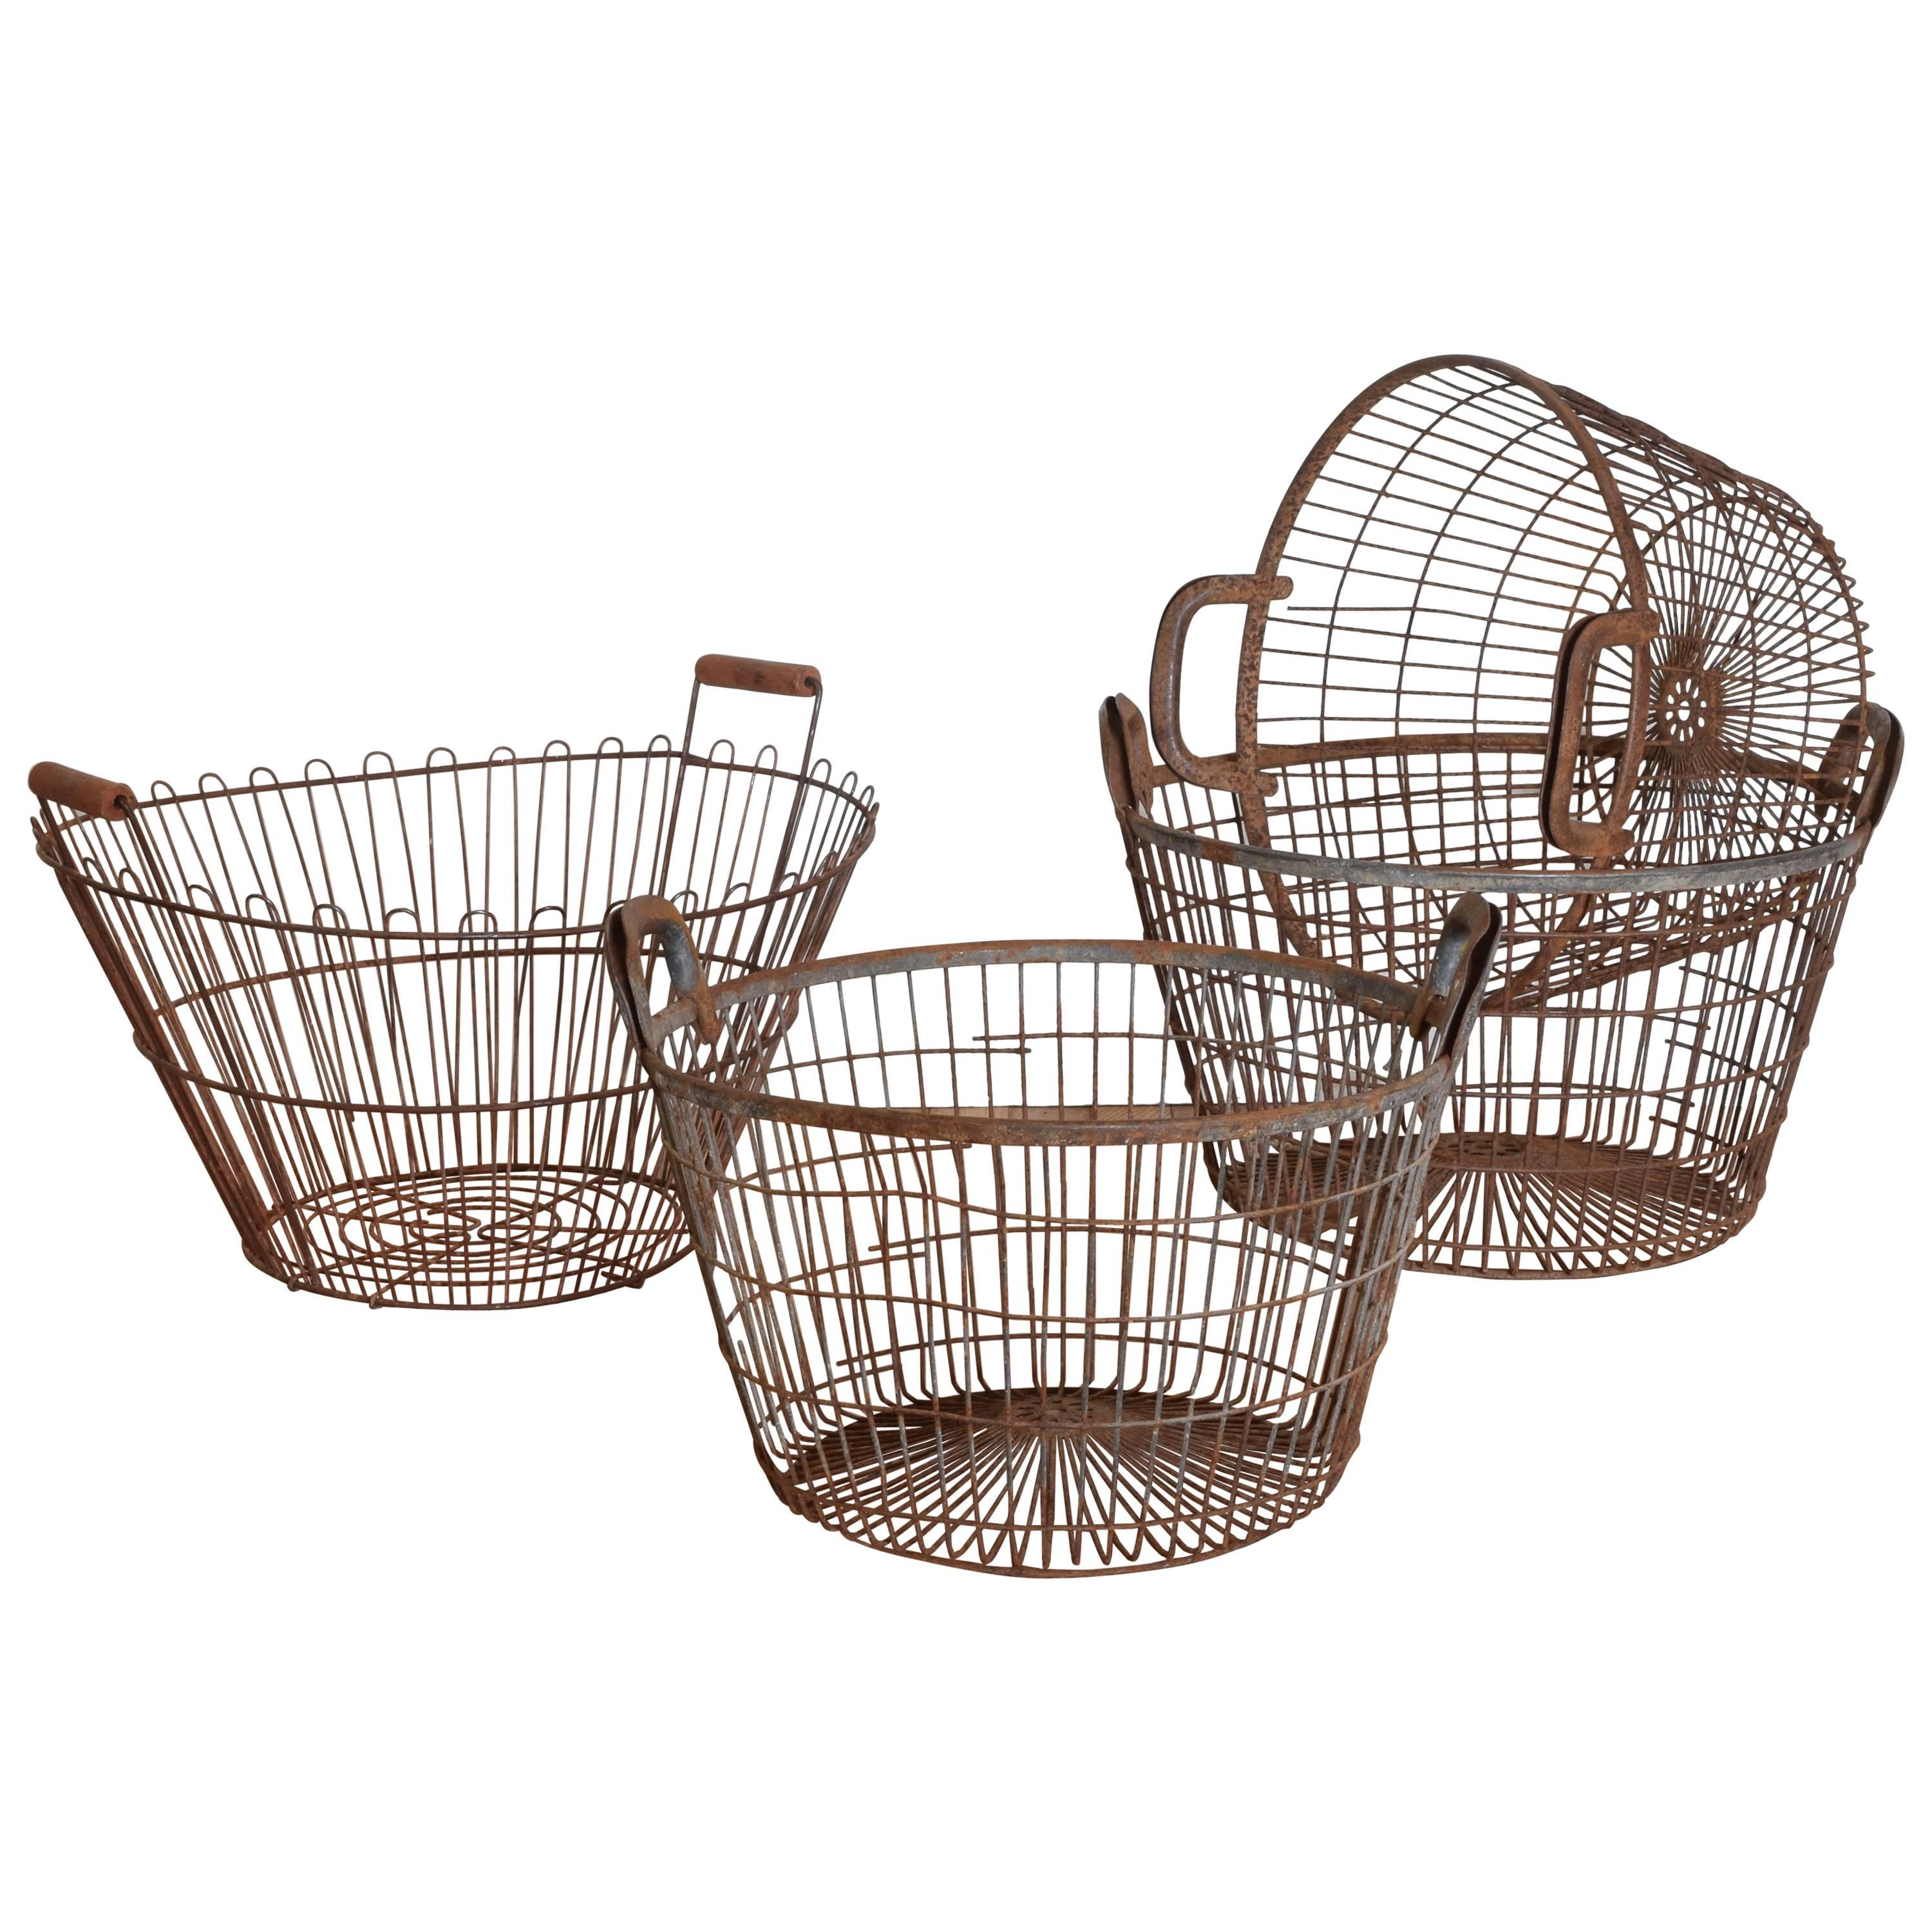 Associated Group of Four French Wire Baskets, 20th Century